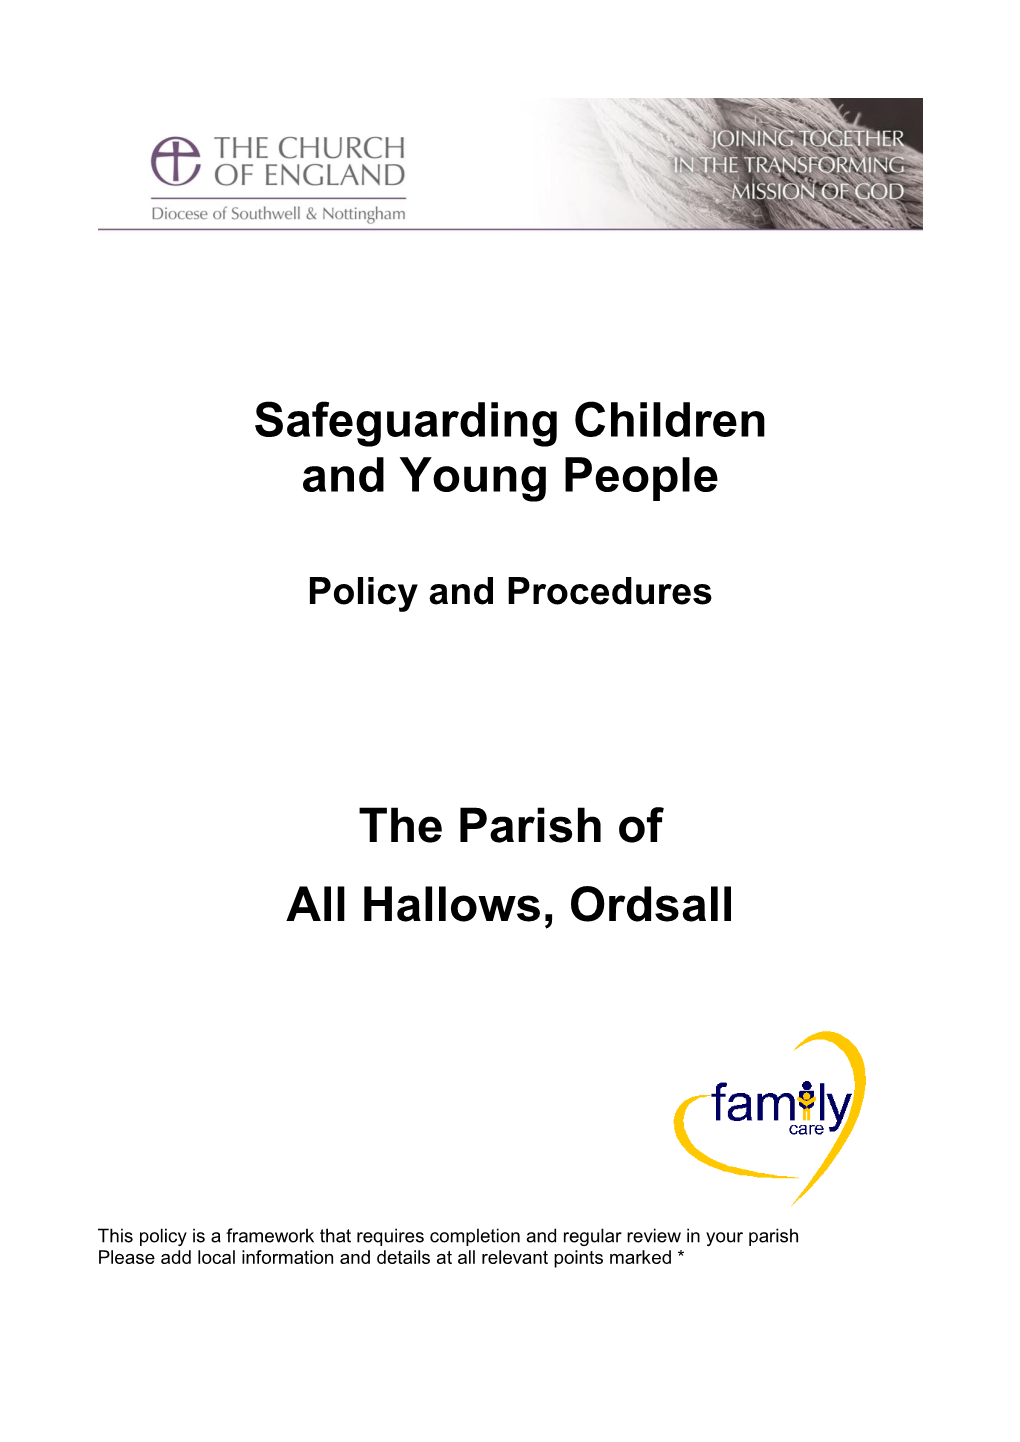 Safeguarding of Children in Our Church